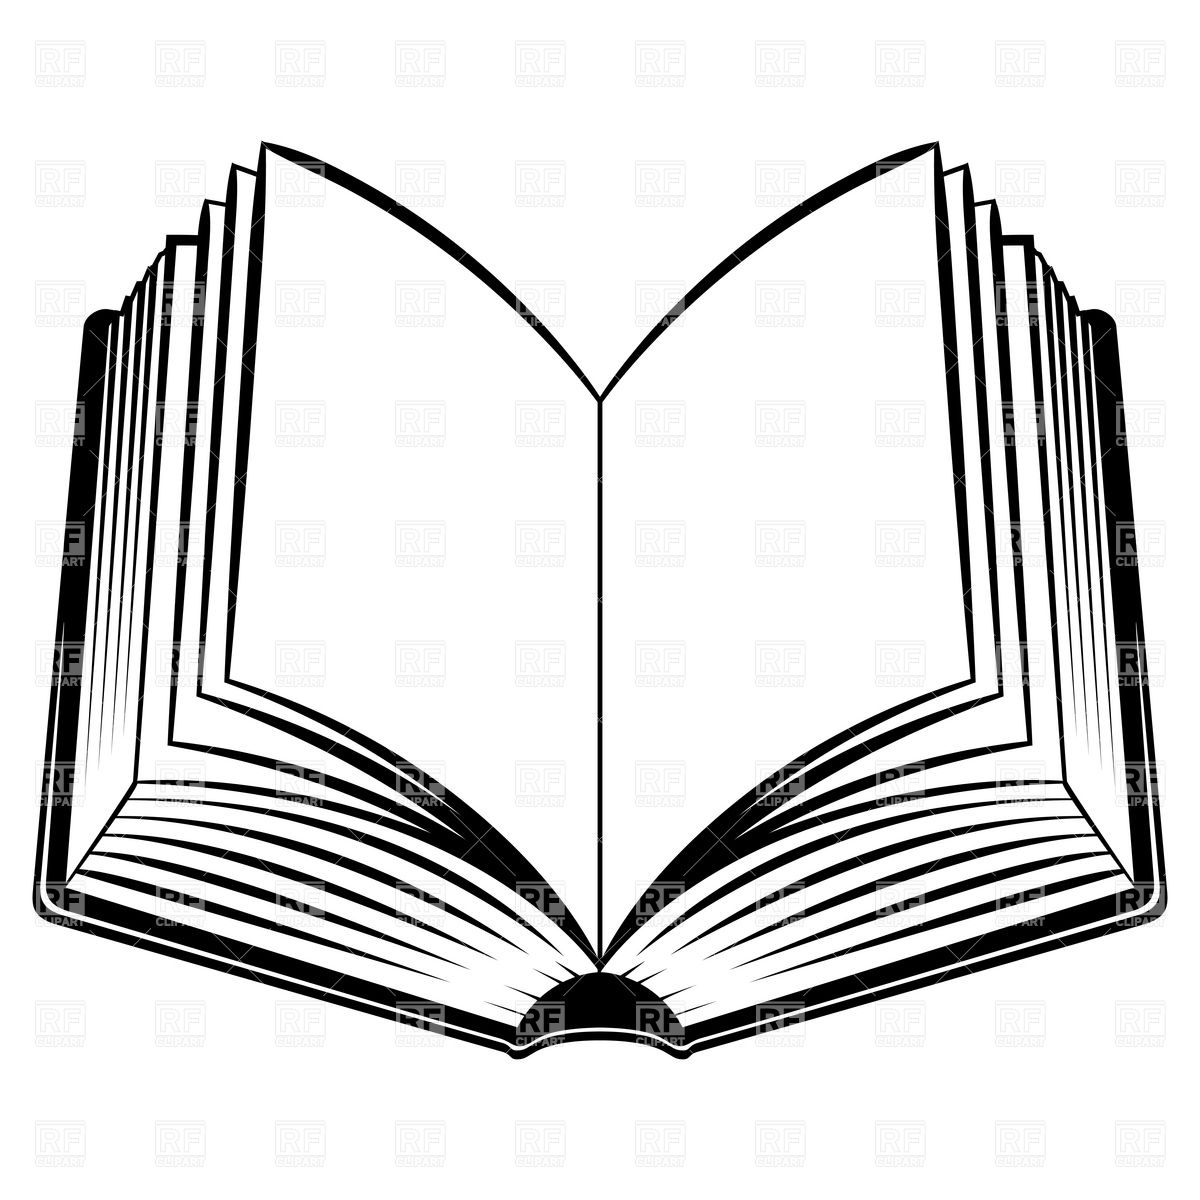 open book clipart black and white - photo #3